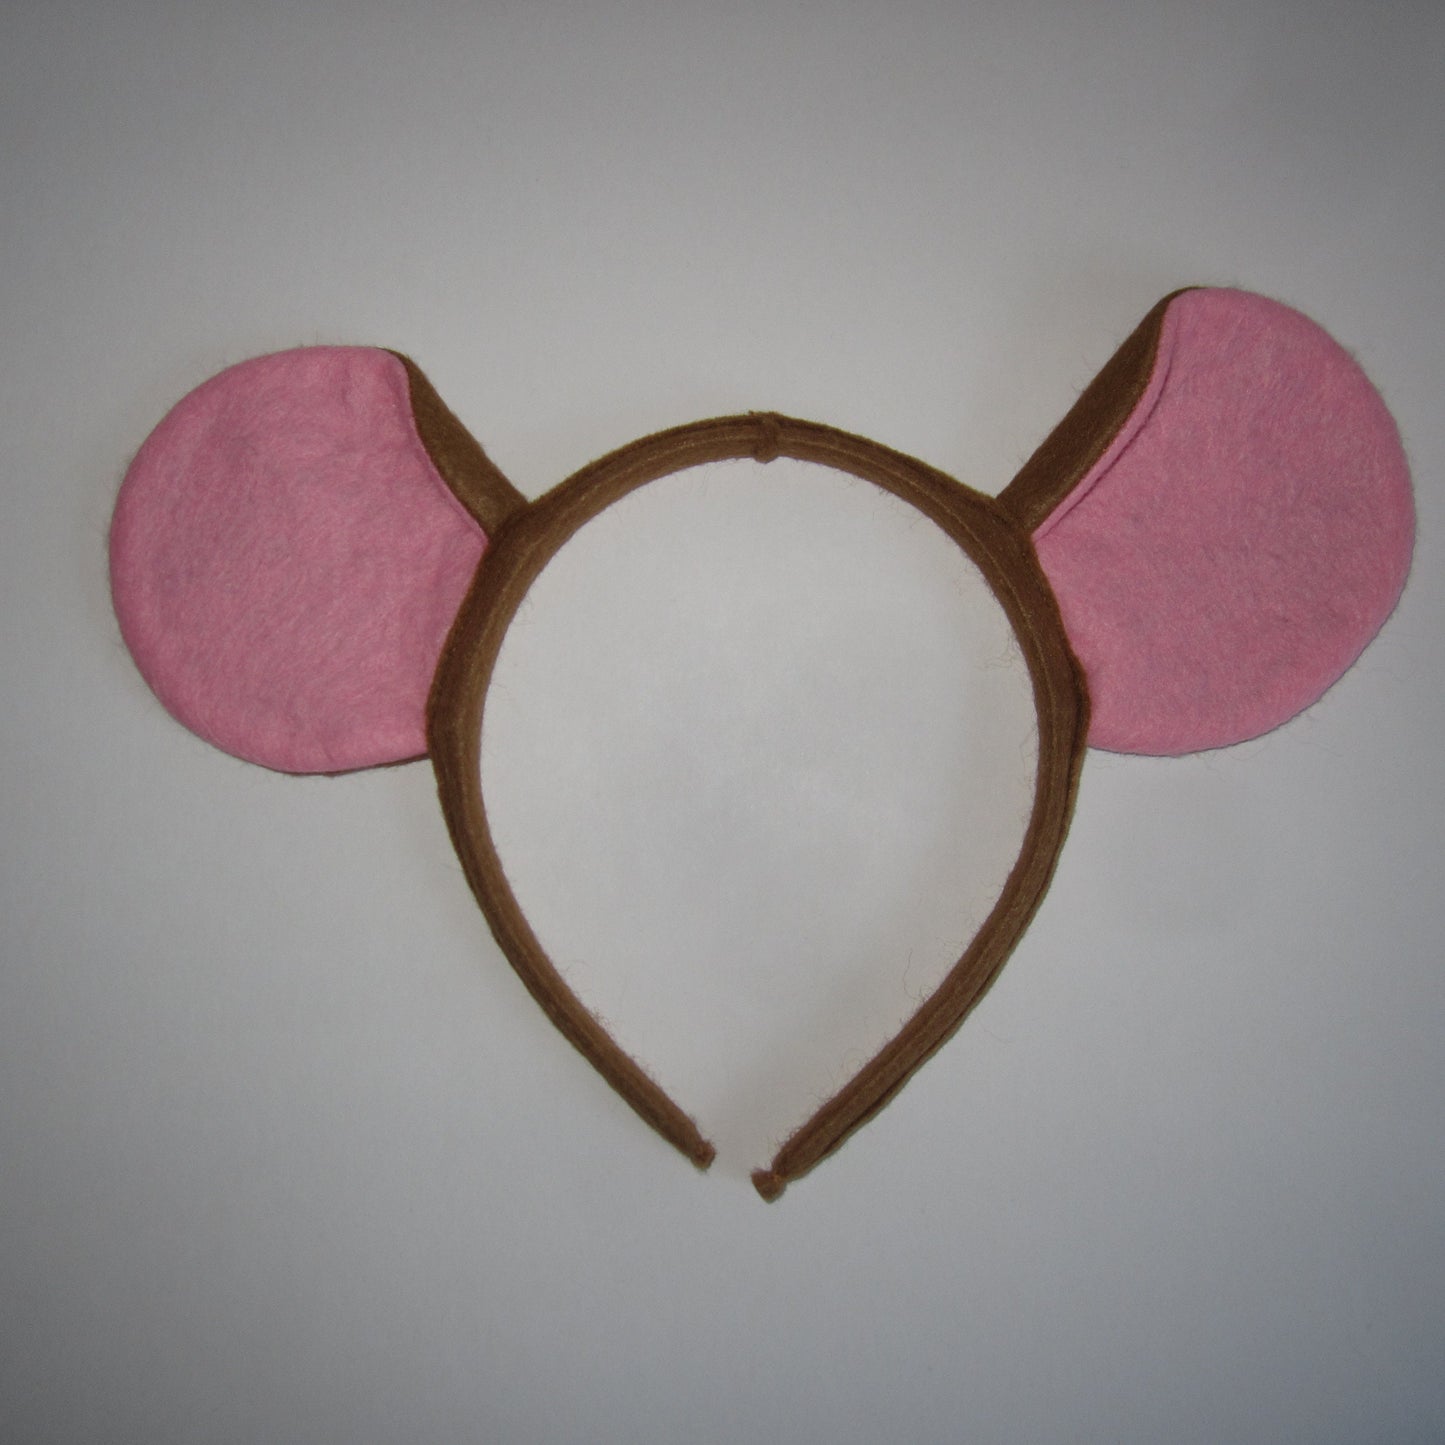 Mouse Ears Hairband with Extra Large Mouse Ears Made of Cinnamon Coloured Felt